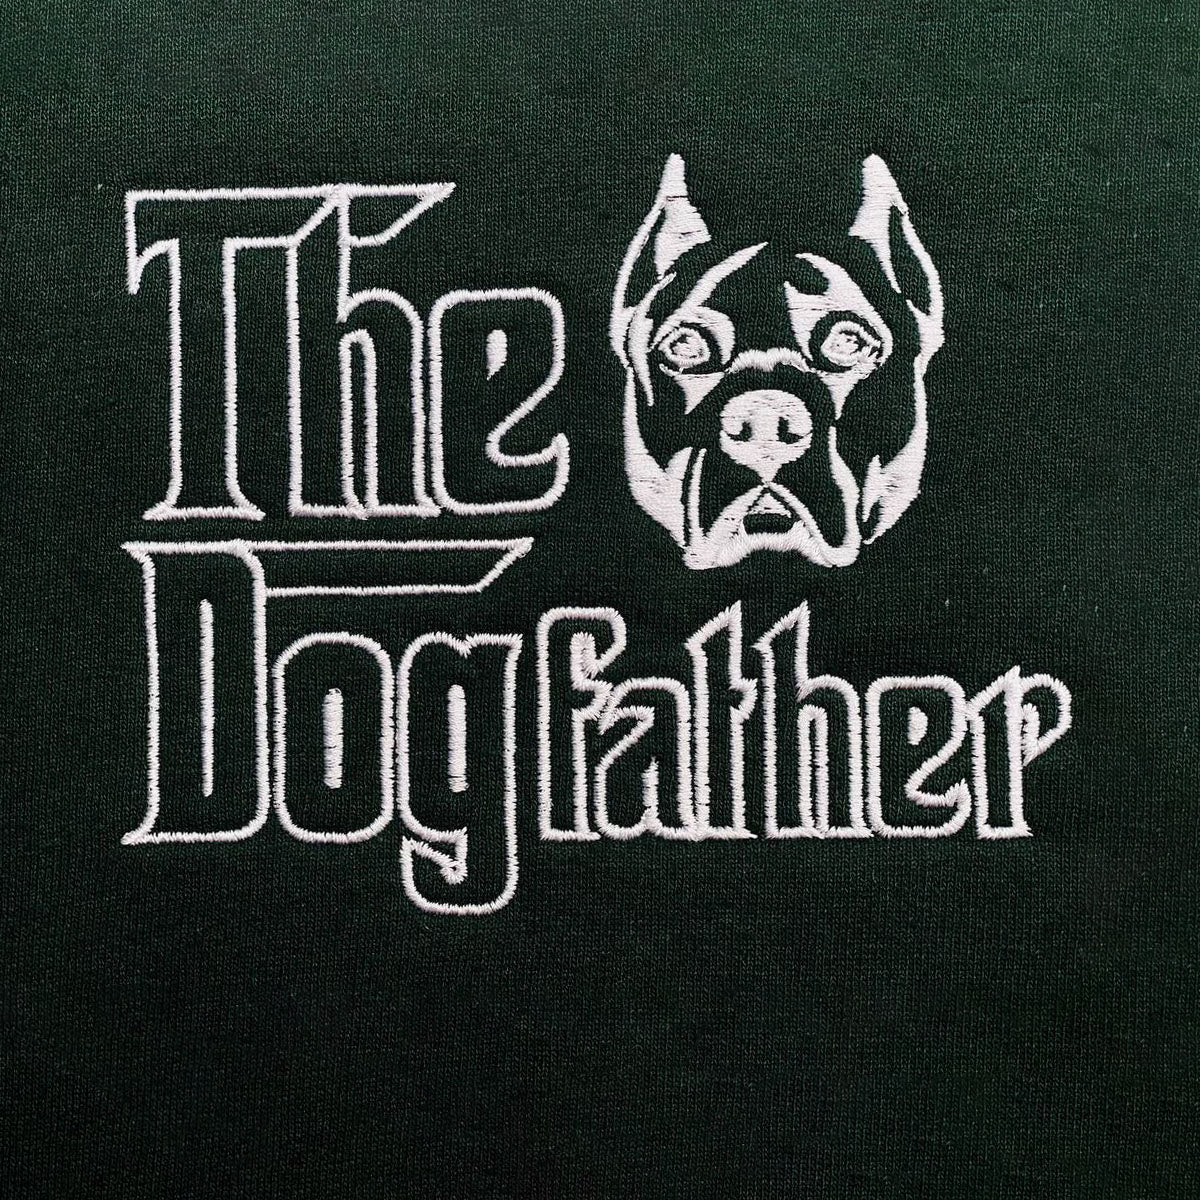 The Pit Bull DogFather Men's T-Shirt